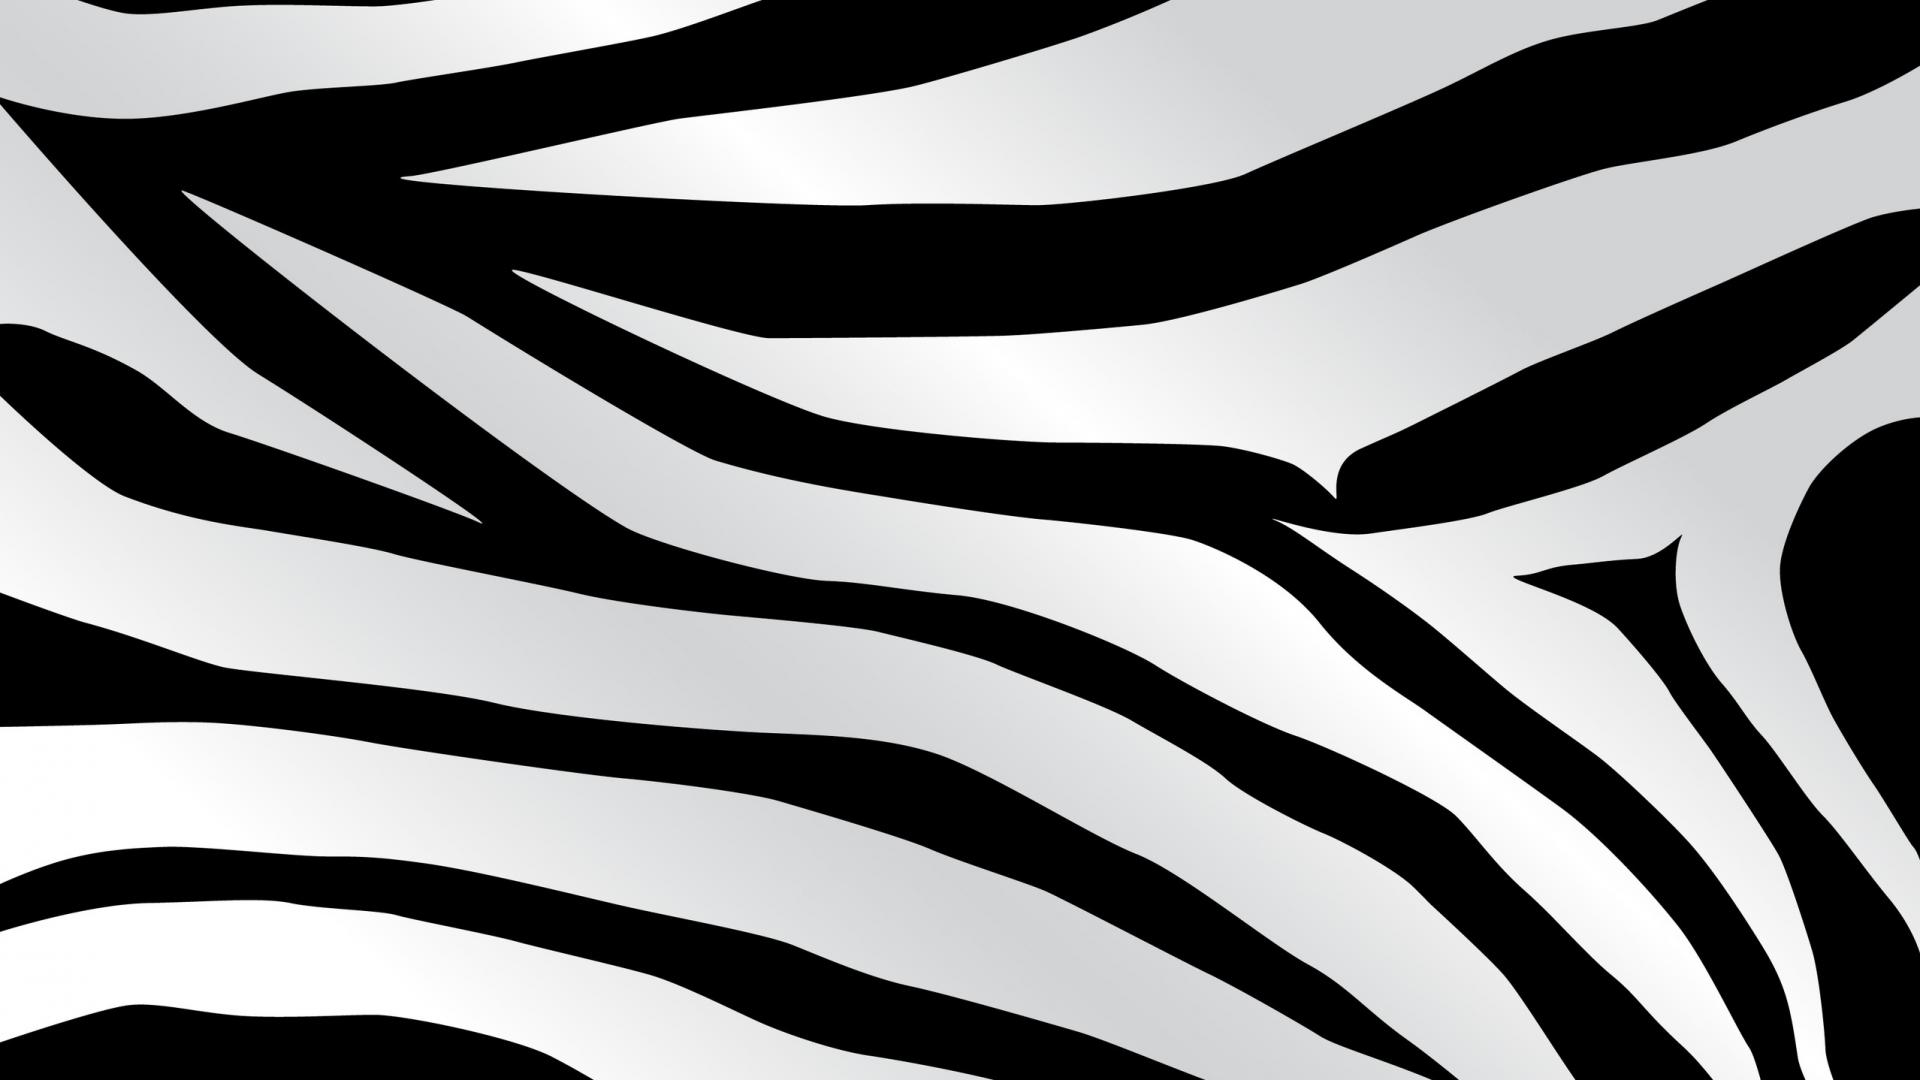 Zebra Slide Backgrounds for Powerpoint Templates - PPT Backgrounds